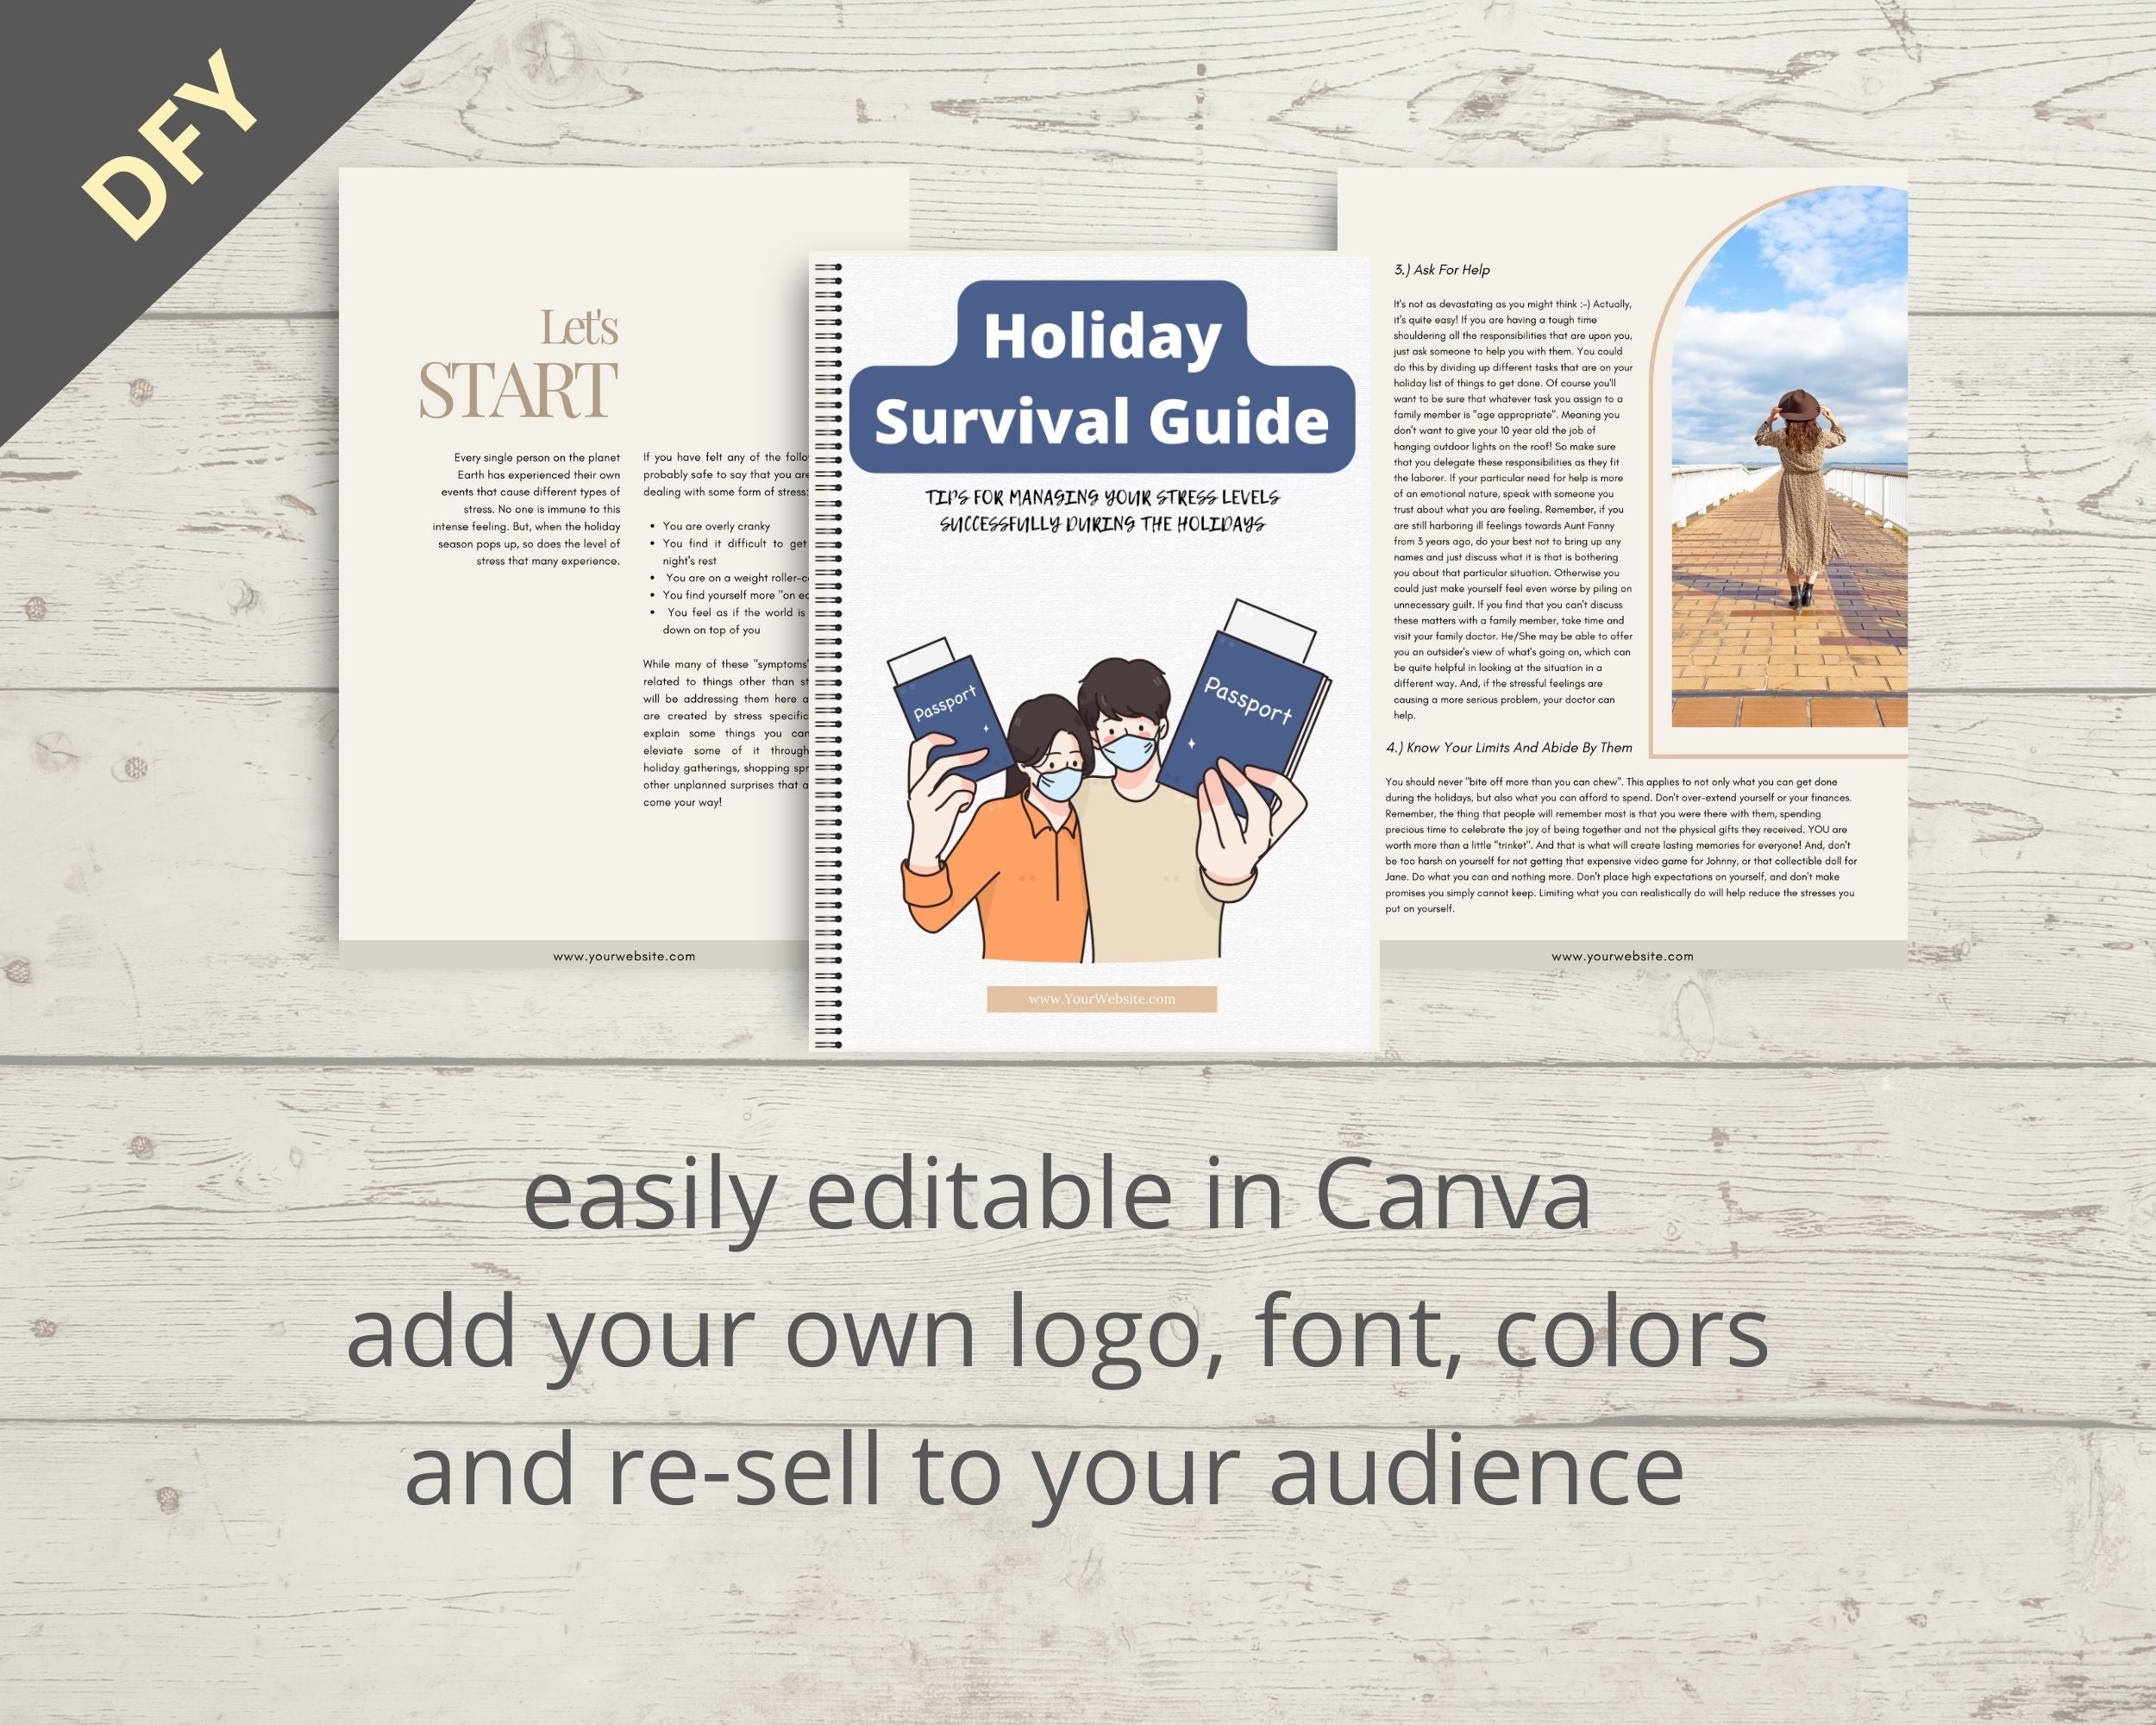 Editable Holiday Survival Guide Ebook in Canva | Rebrandable and Resizable Canva Template